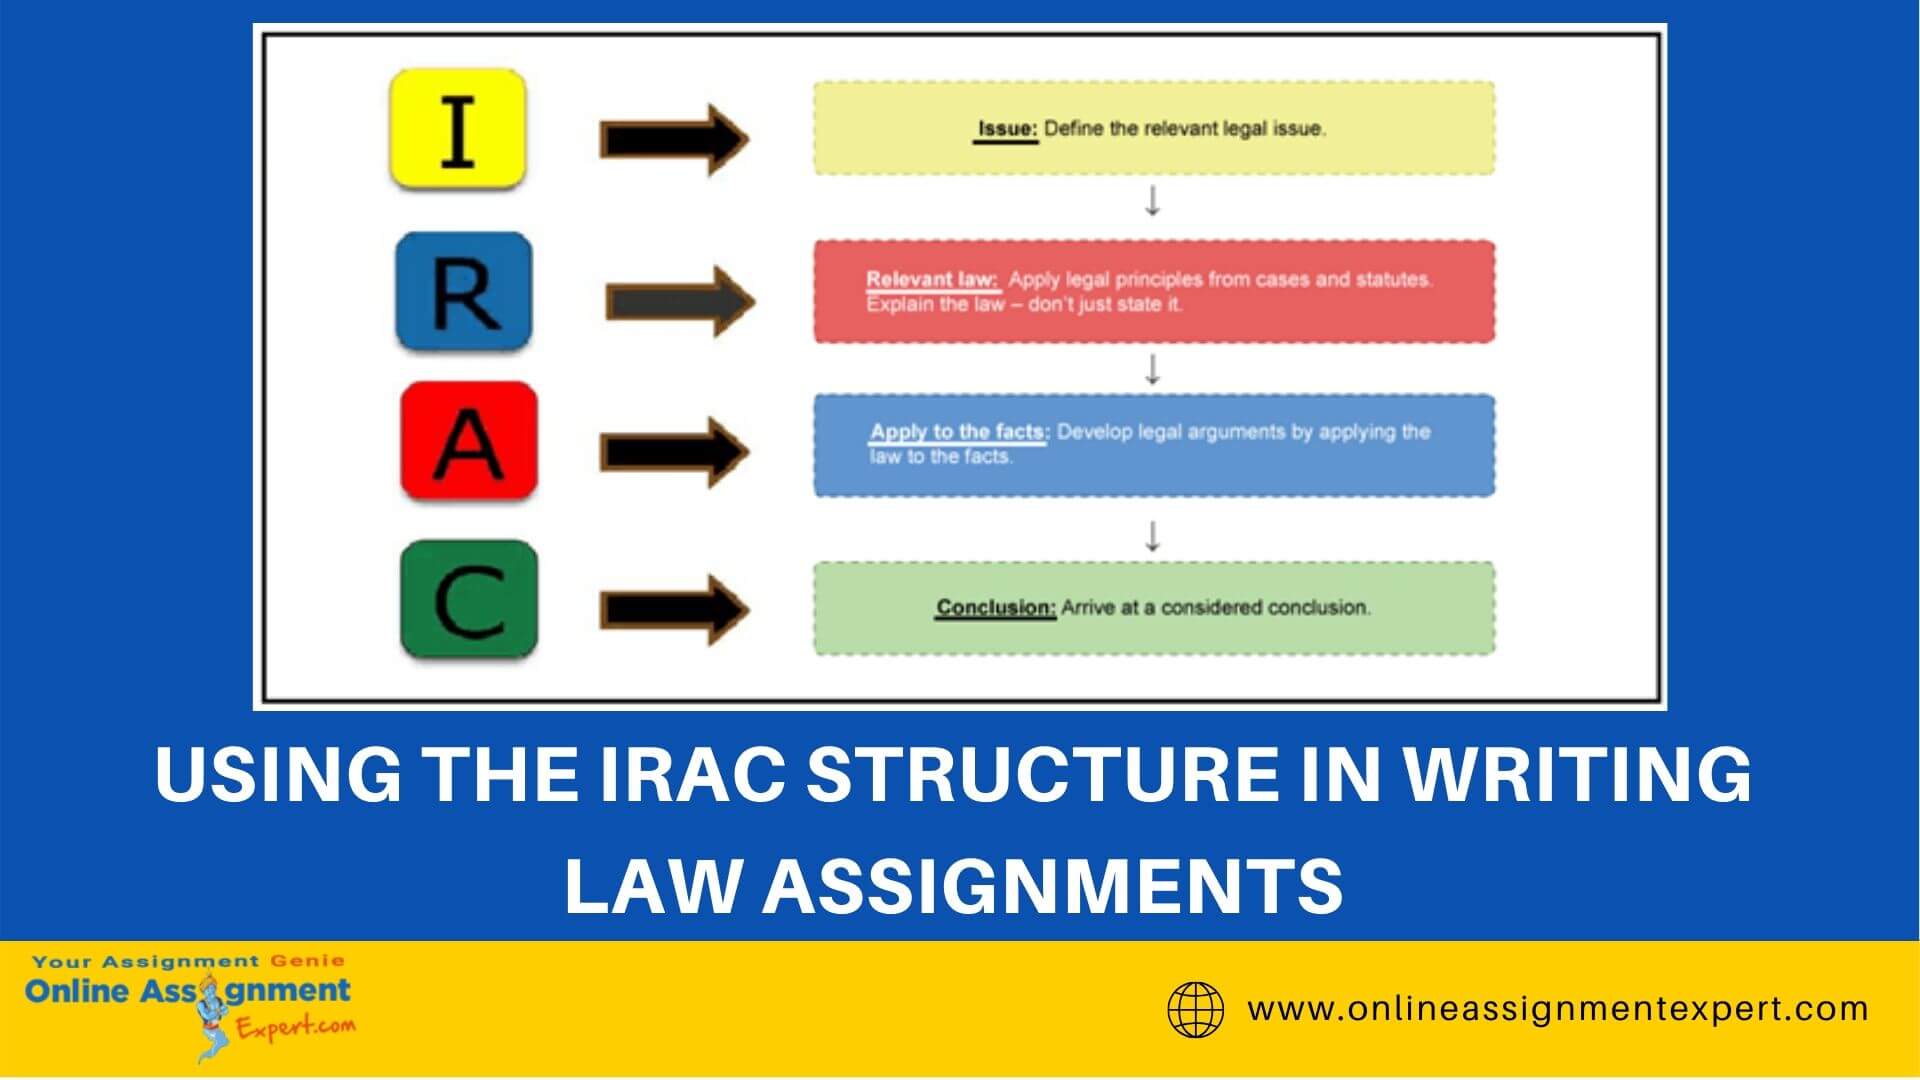 Using The IRAC Structure In Writing Law Assignments